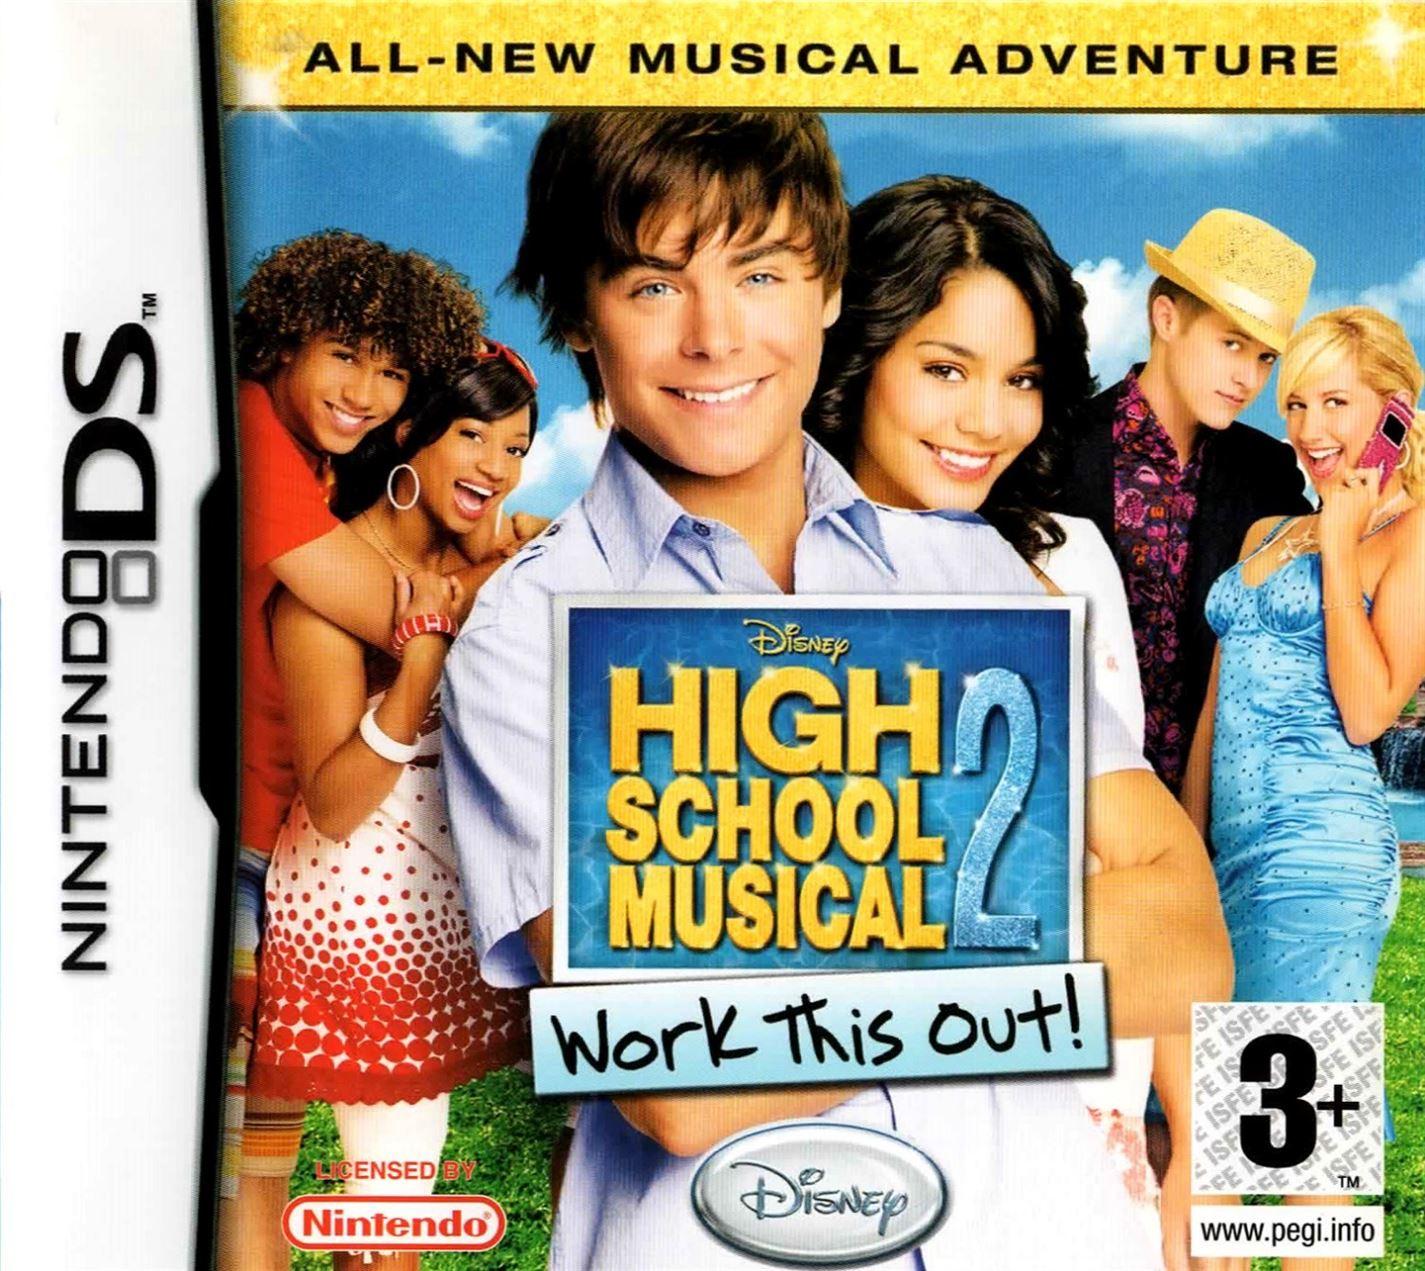 High School Musical 2 Work This Out DS (Nintendo DS) - UK NP